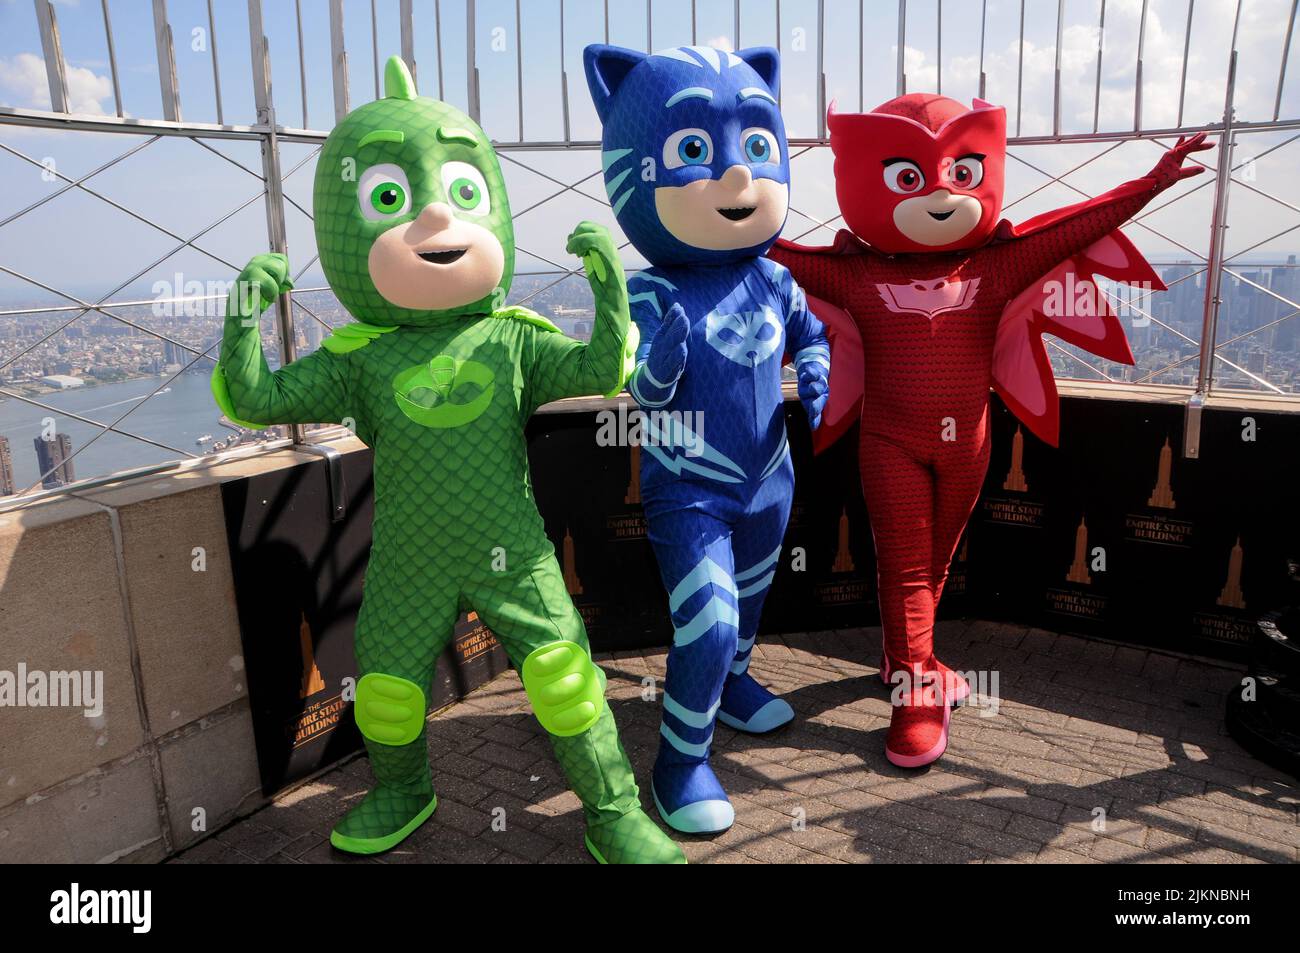 Opstand Familielid Kwadrant Left to Right) Gekko, Catboy and Owlette, PJ Masks heroes visit the Empire  State Building to celebrate new 'Animal Power' episodes on Disney Junior,  in New York City. (Photo by Efren Landaos /